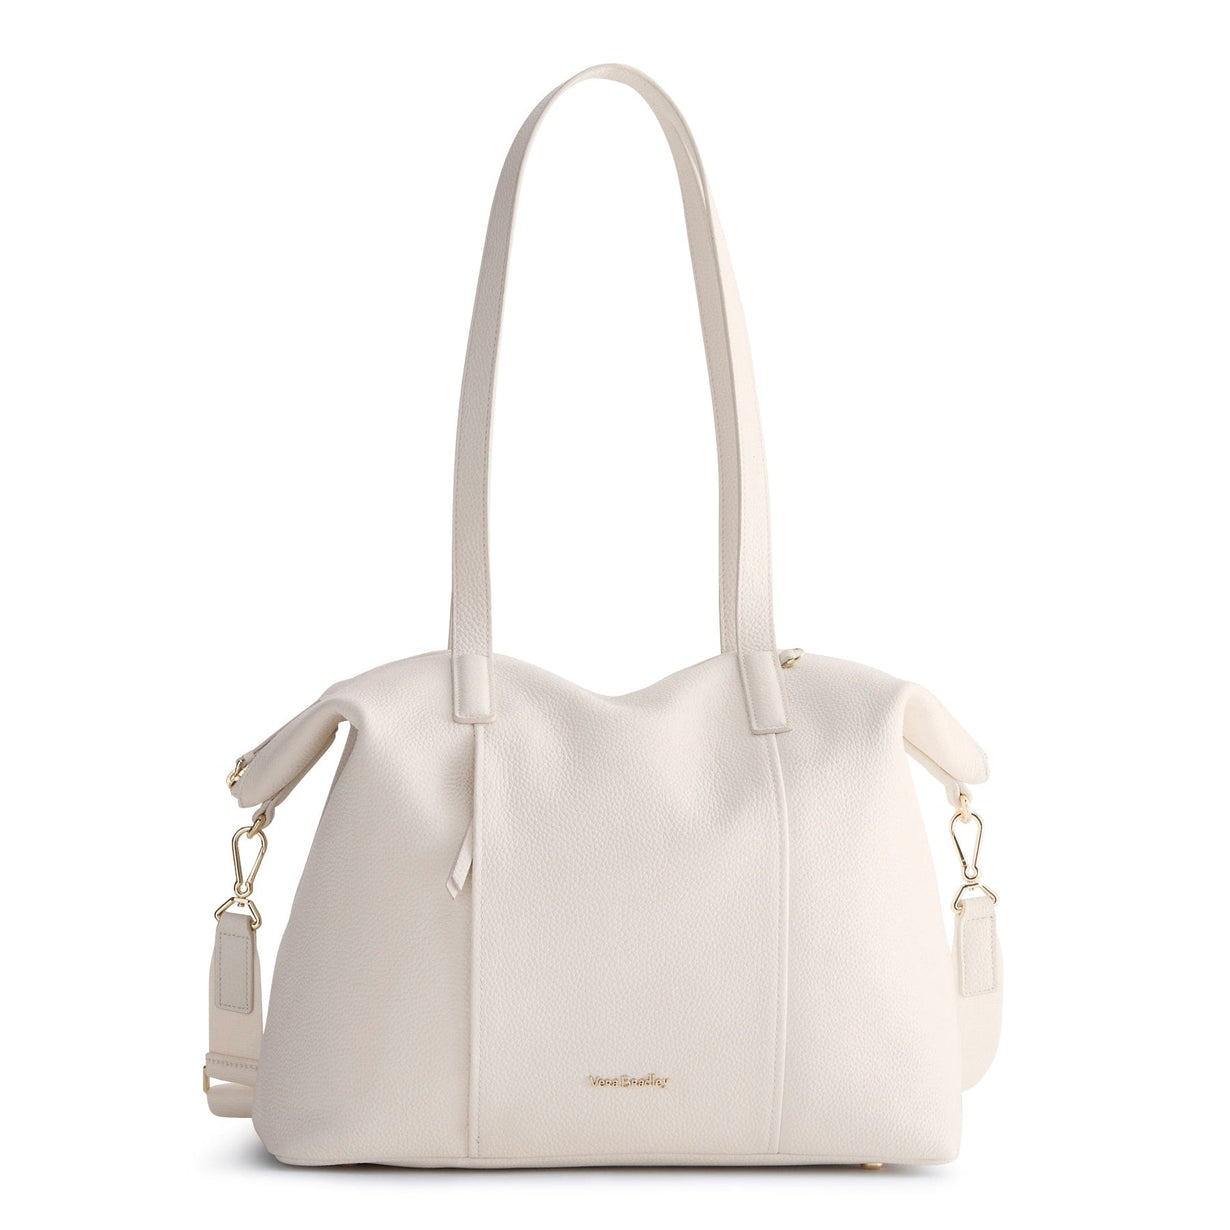 white leather tote bag with gold hardware and crossbody strap